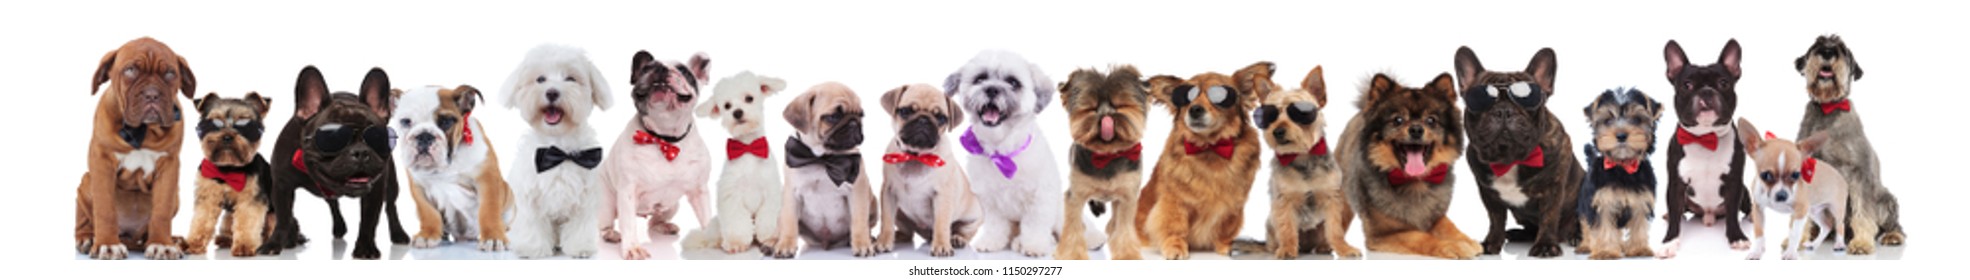 large group of gentleman dogs of different breeds wearing bowties standing, sitting and lying on white background - Shutterstock ID 1150297277